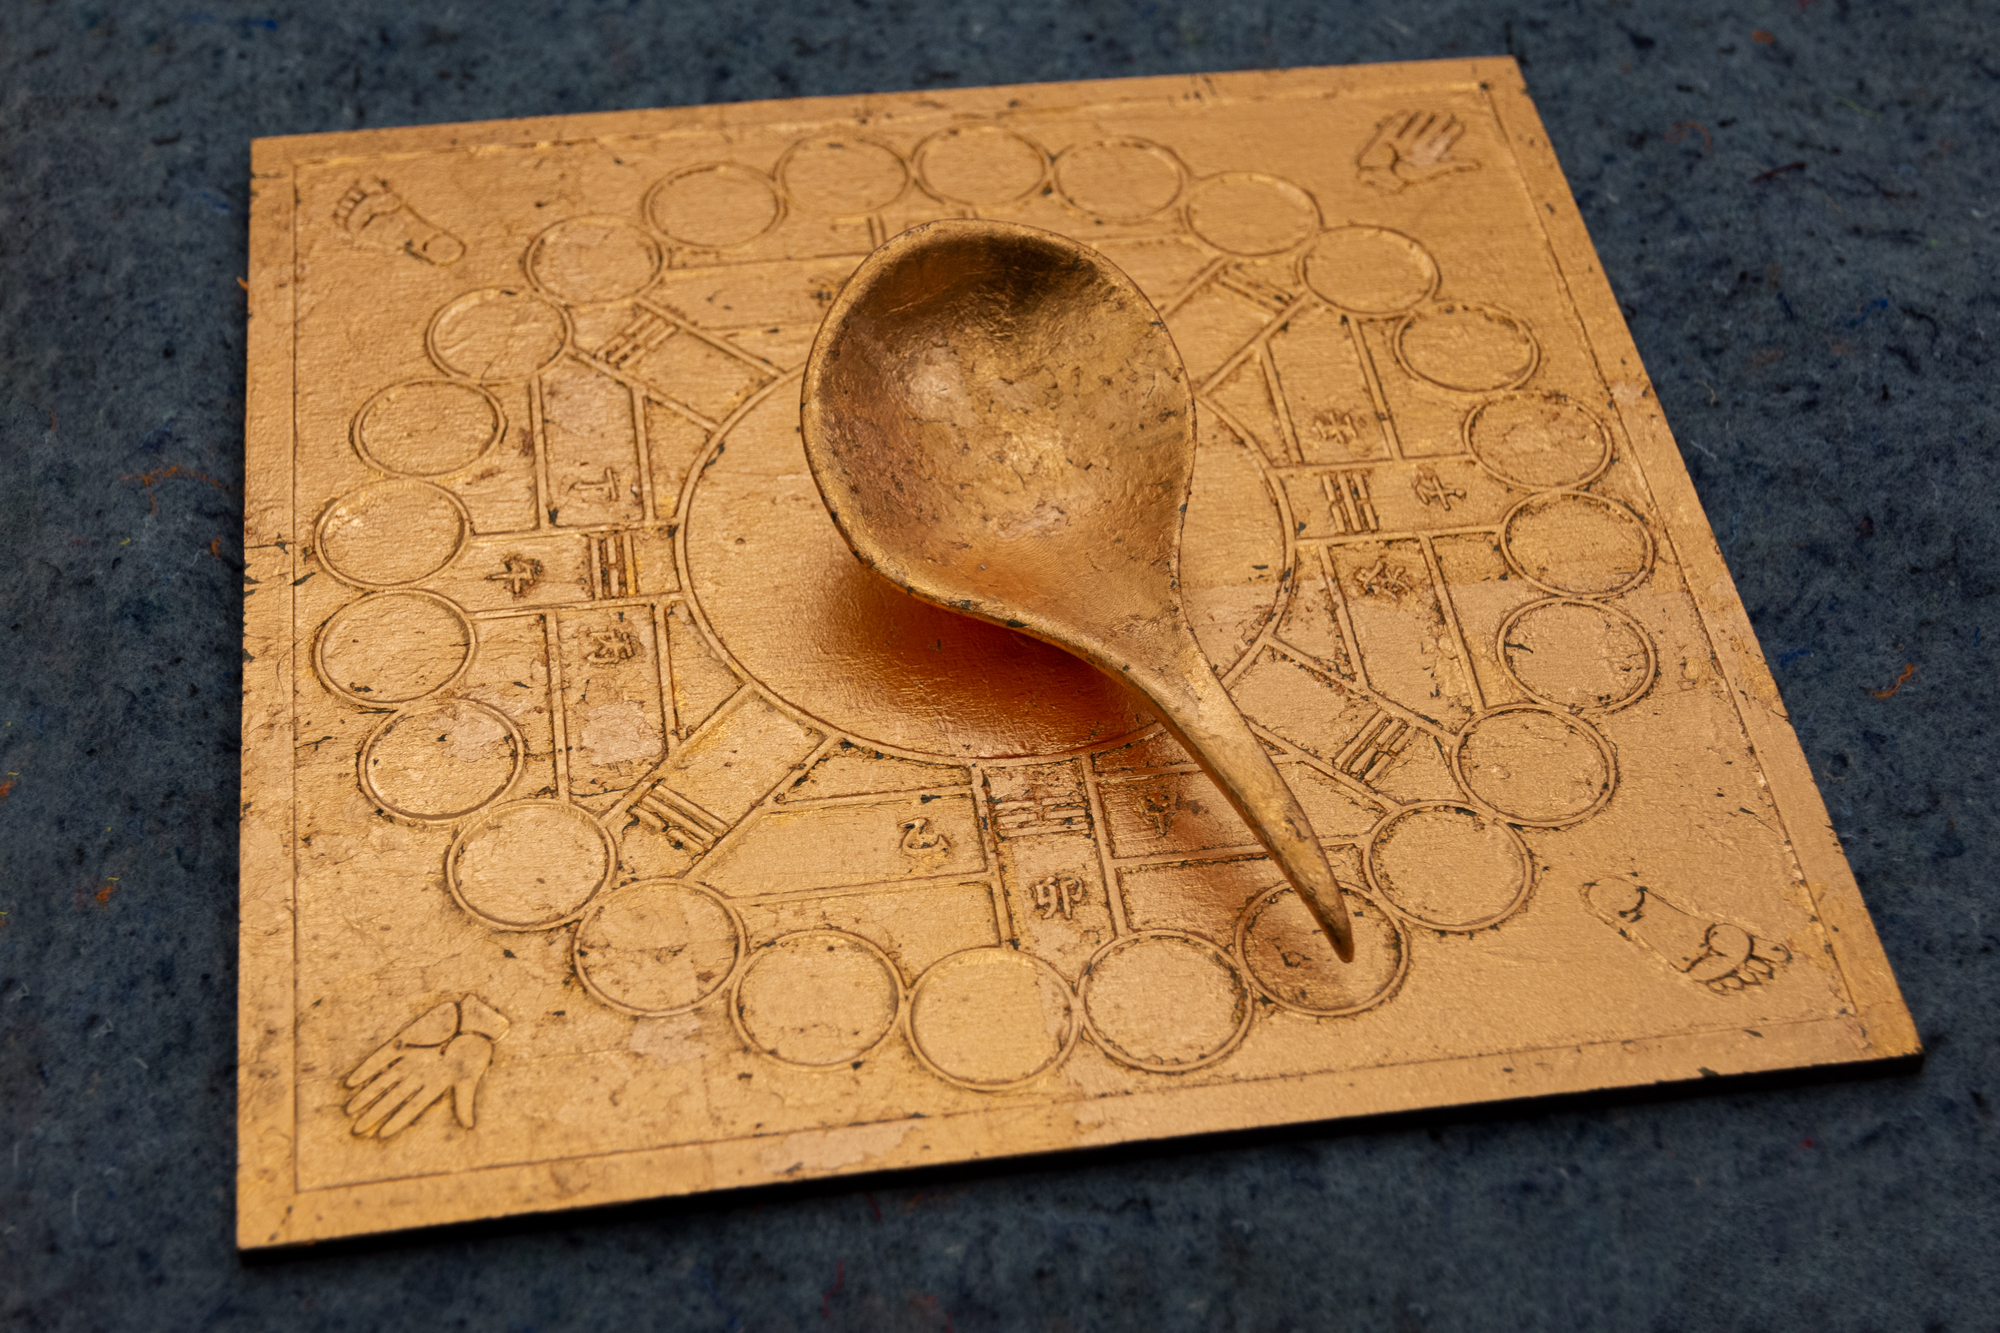 A copper leafed board that simultaneously resembles an early Chinese ladle compass and the spinner from the game of Twister.